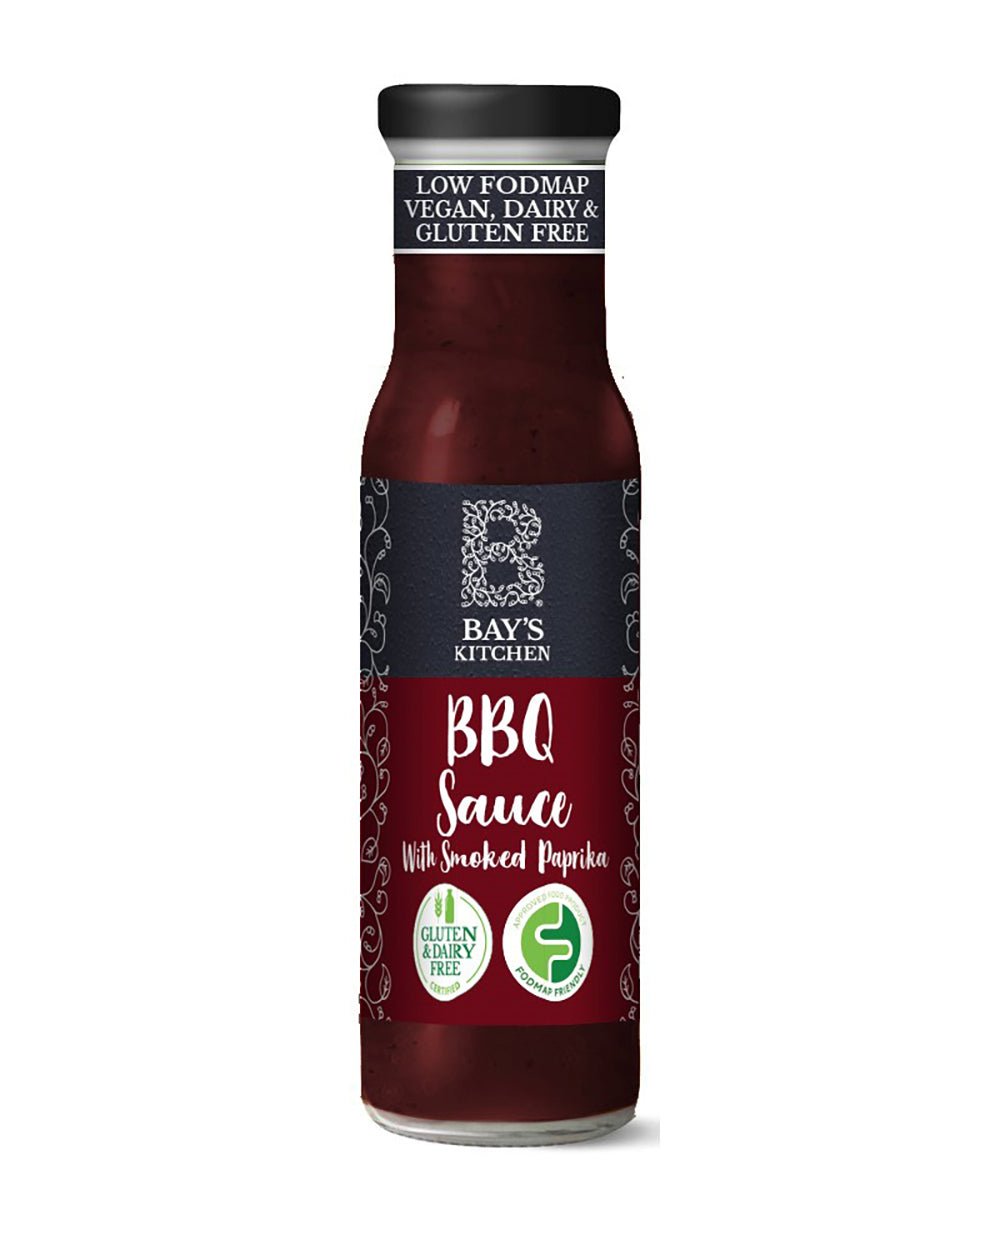 Bays Kitchen Low FODMAP BBQ Sauce with Smoked Paprika 275g - Pack of 2